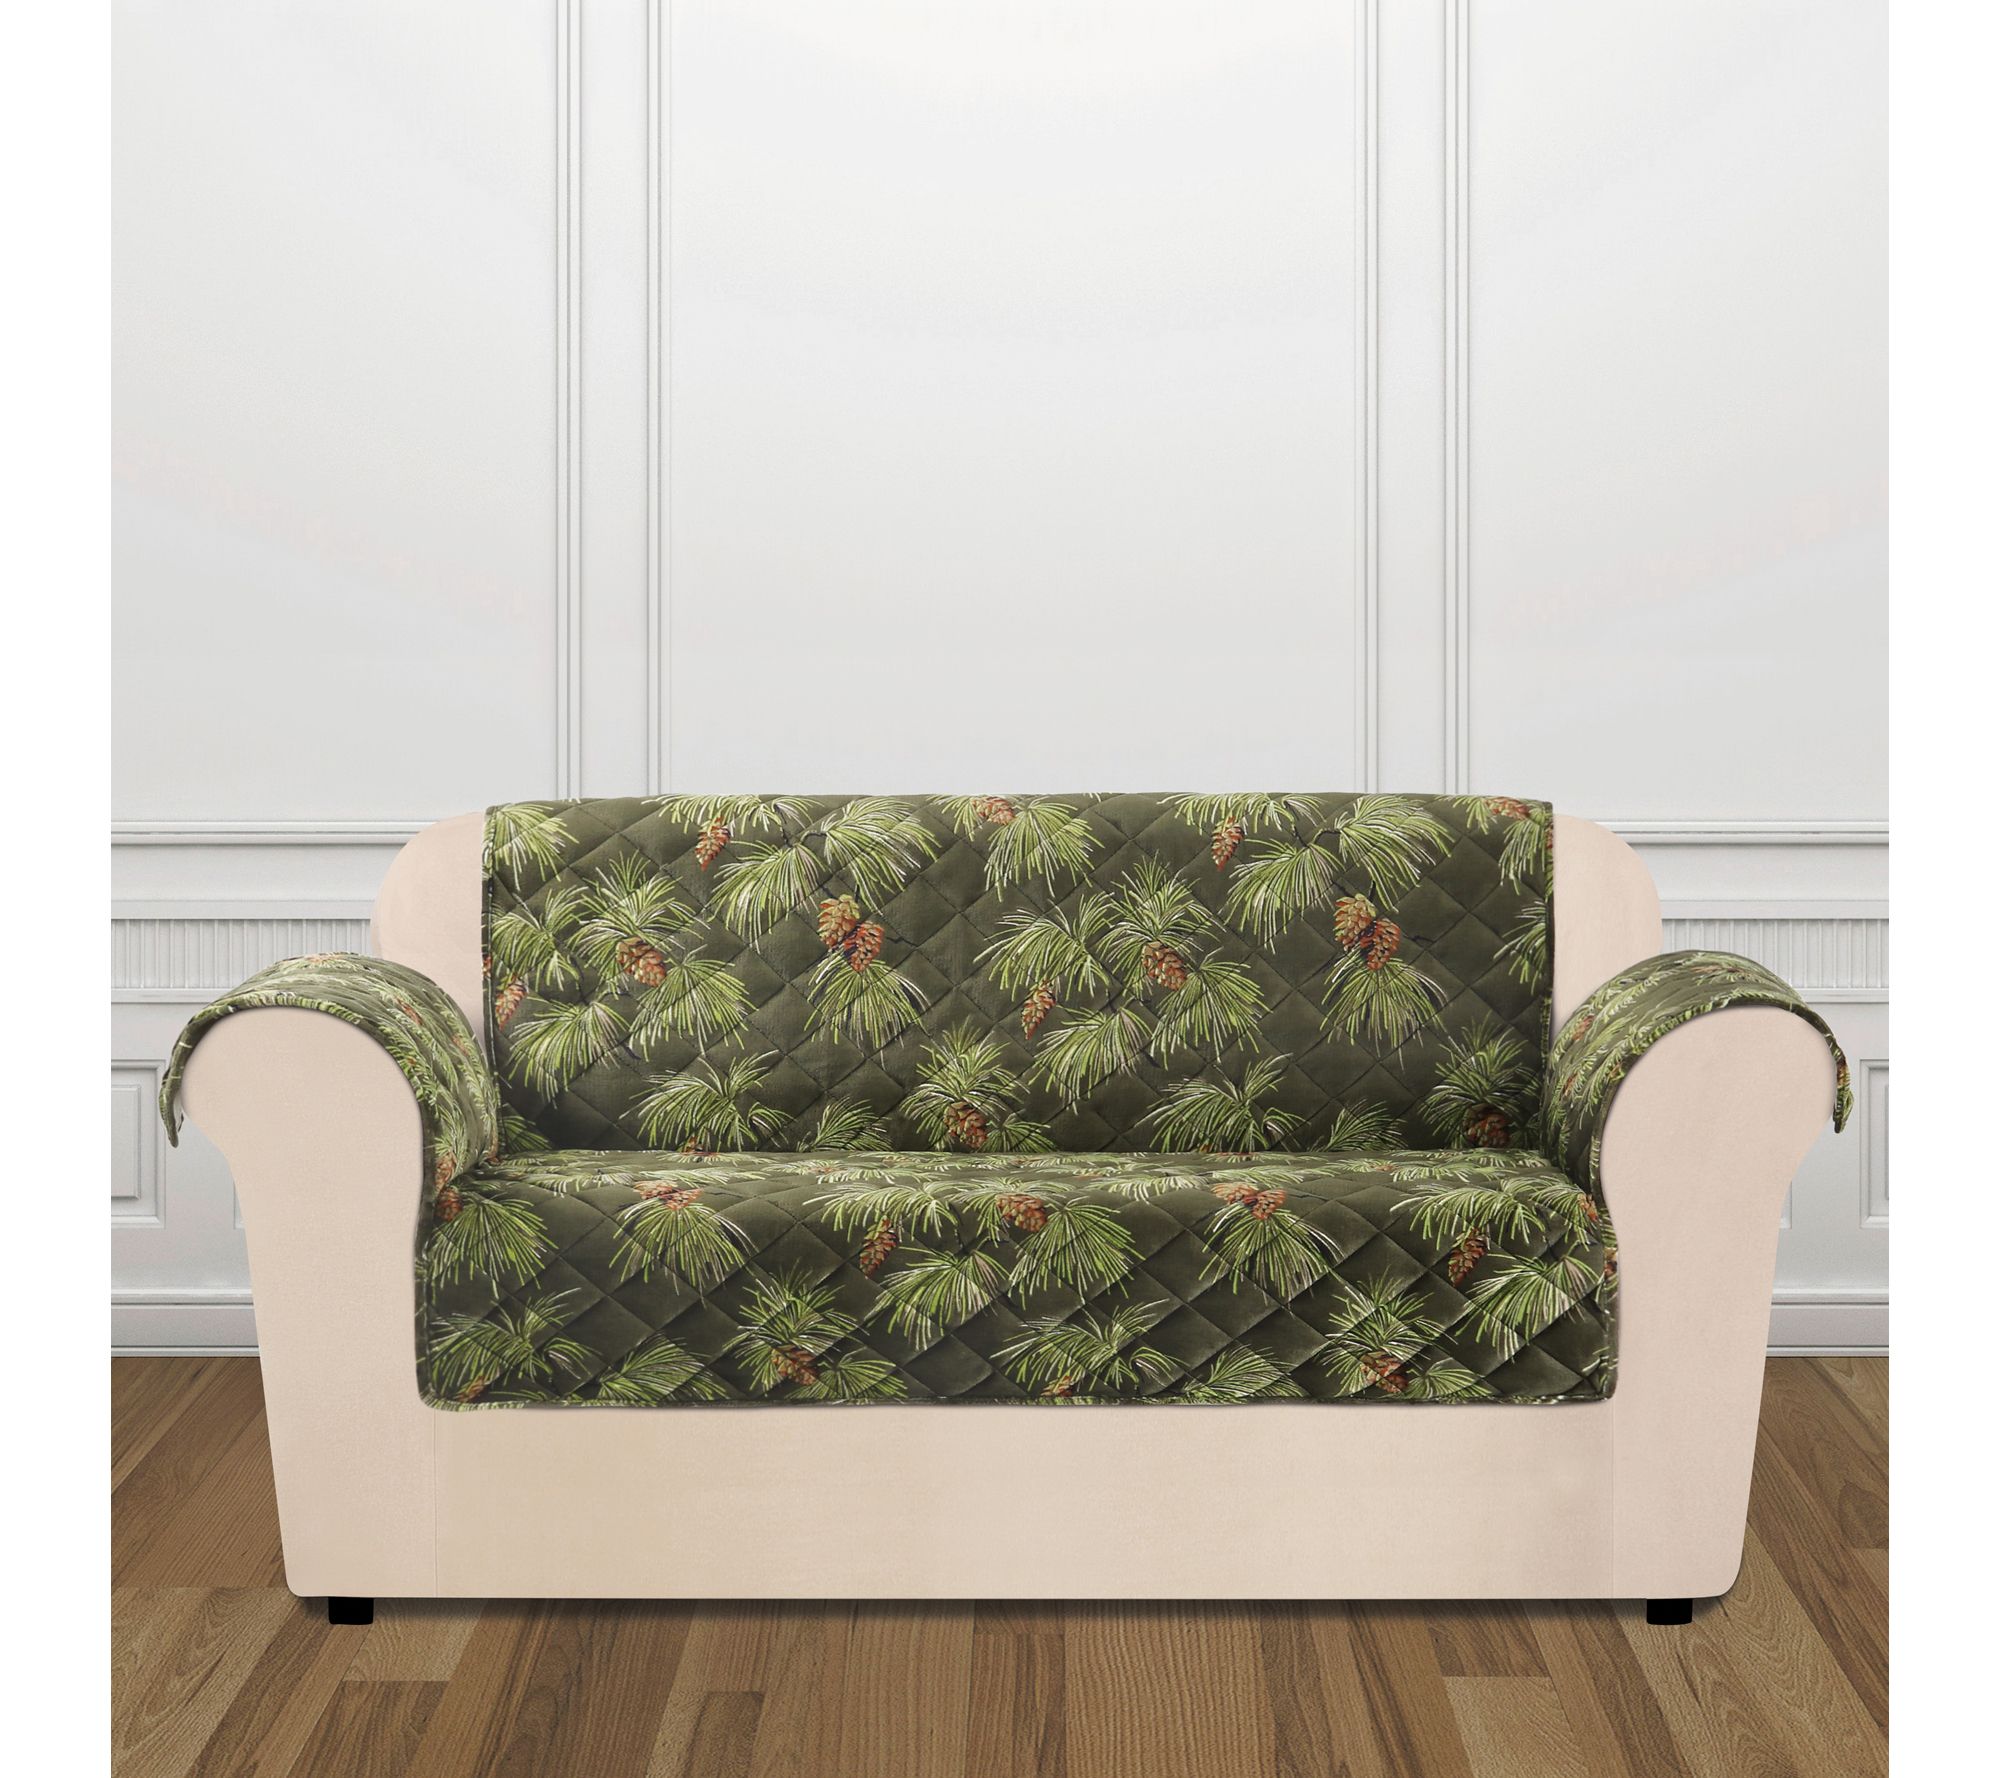 Sure Fit Holiday Plush Love Seat Furniture Cover